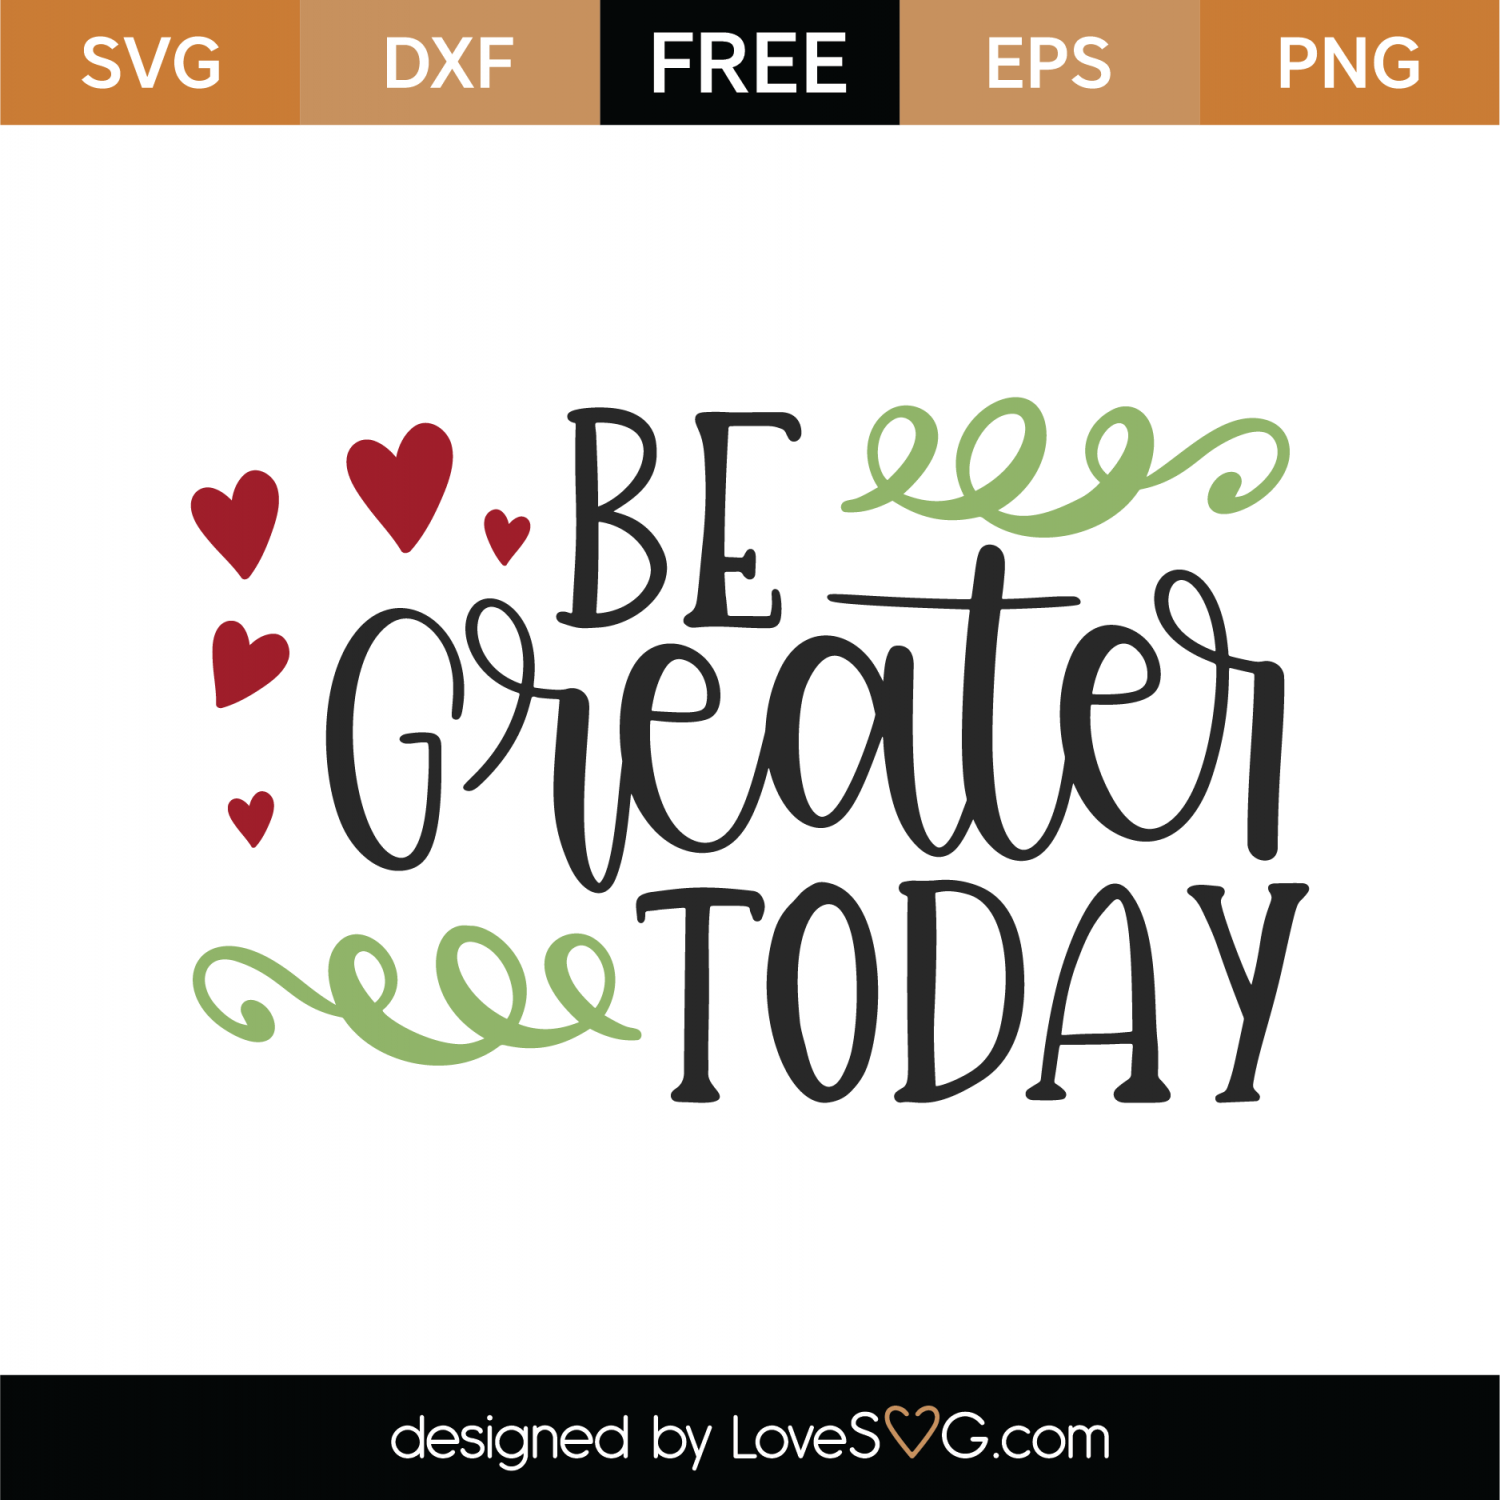 Download Free Be Greater Today SVG Cut File | Lovesvg.com